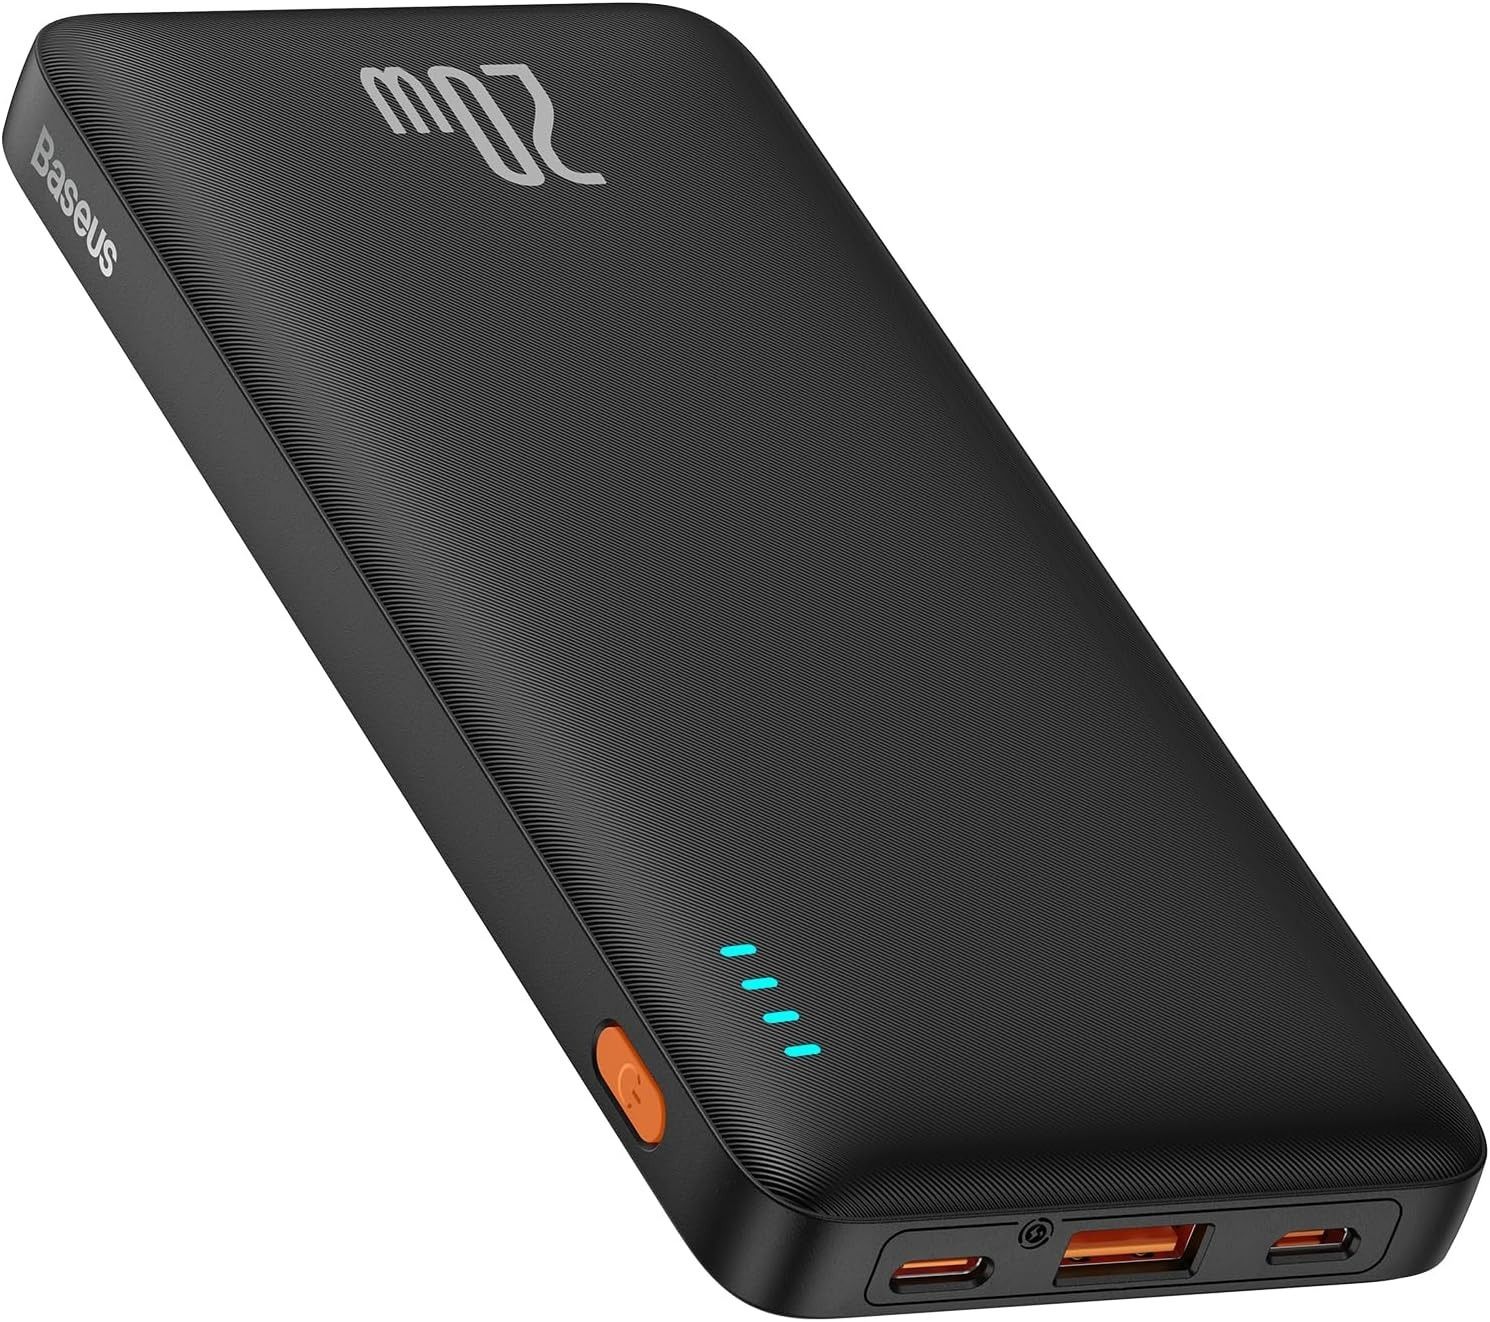 Baseus PD 20W 10,000mAh Portable Charger $13 + Free Shipping w/ Prime or $35+ orders